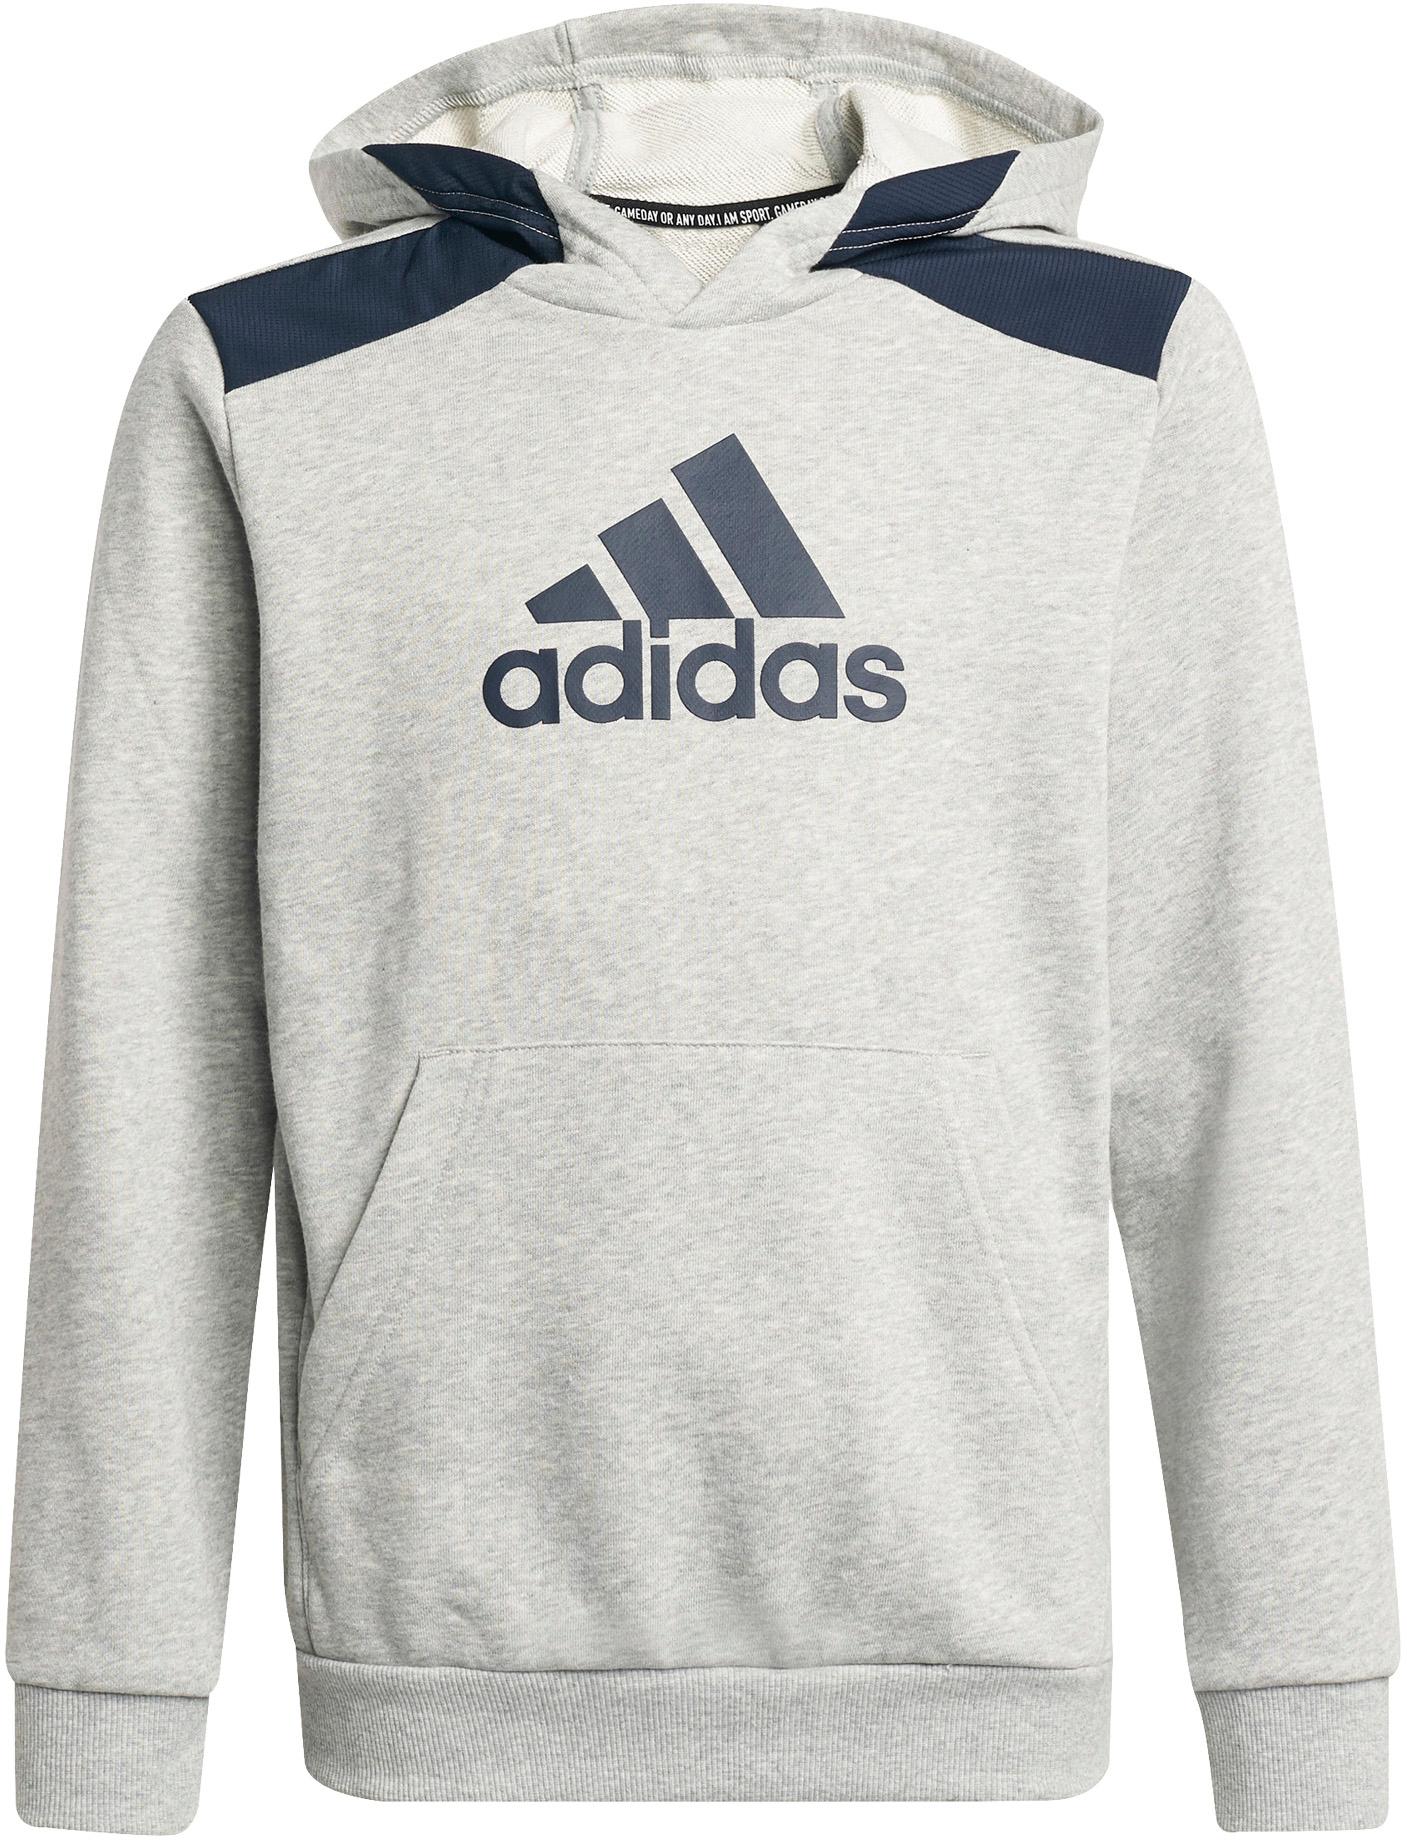 Image of adidas FUTURE ICONS Hoodie Jungen